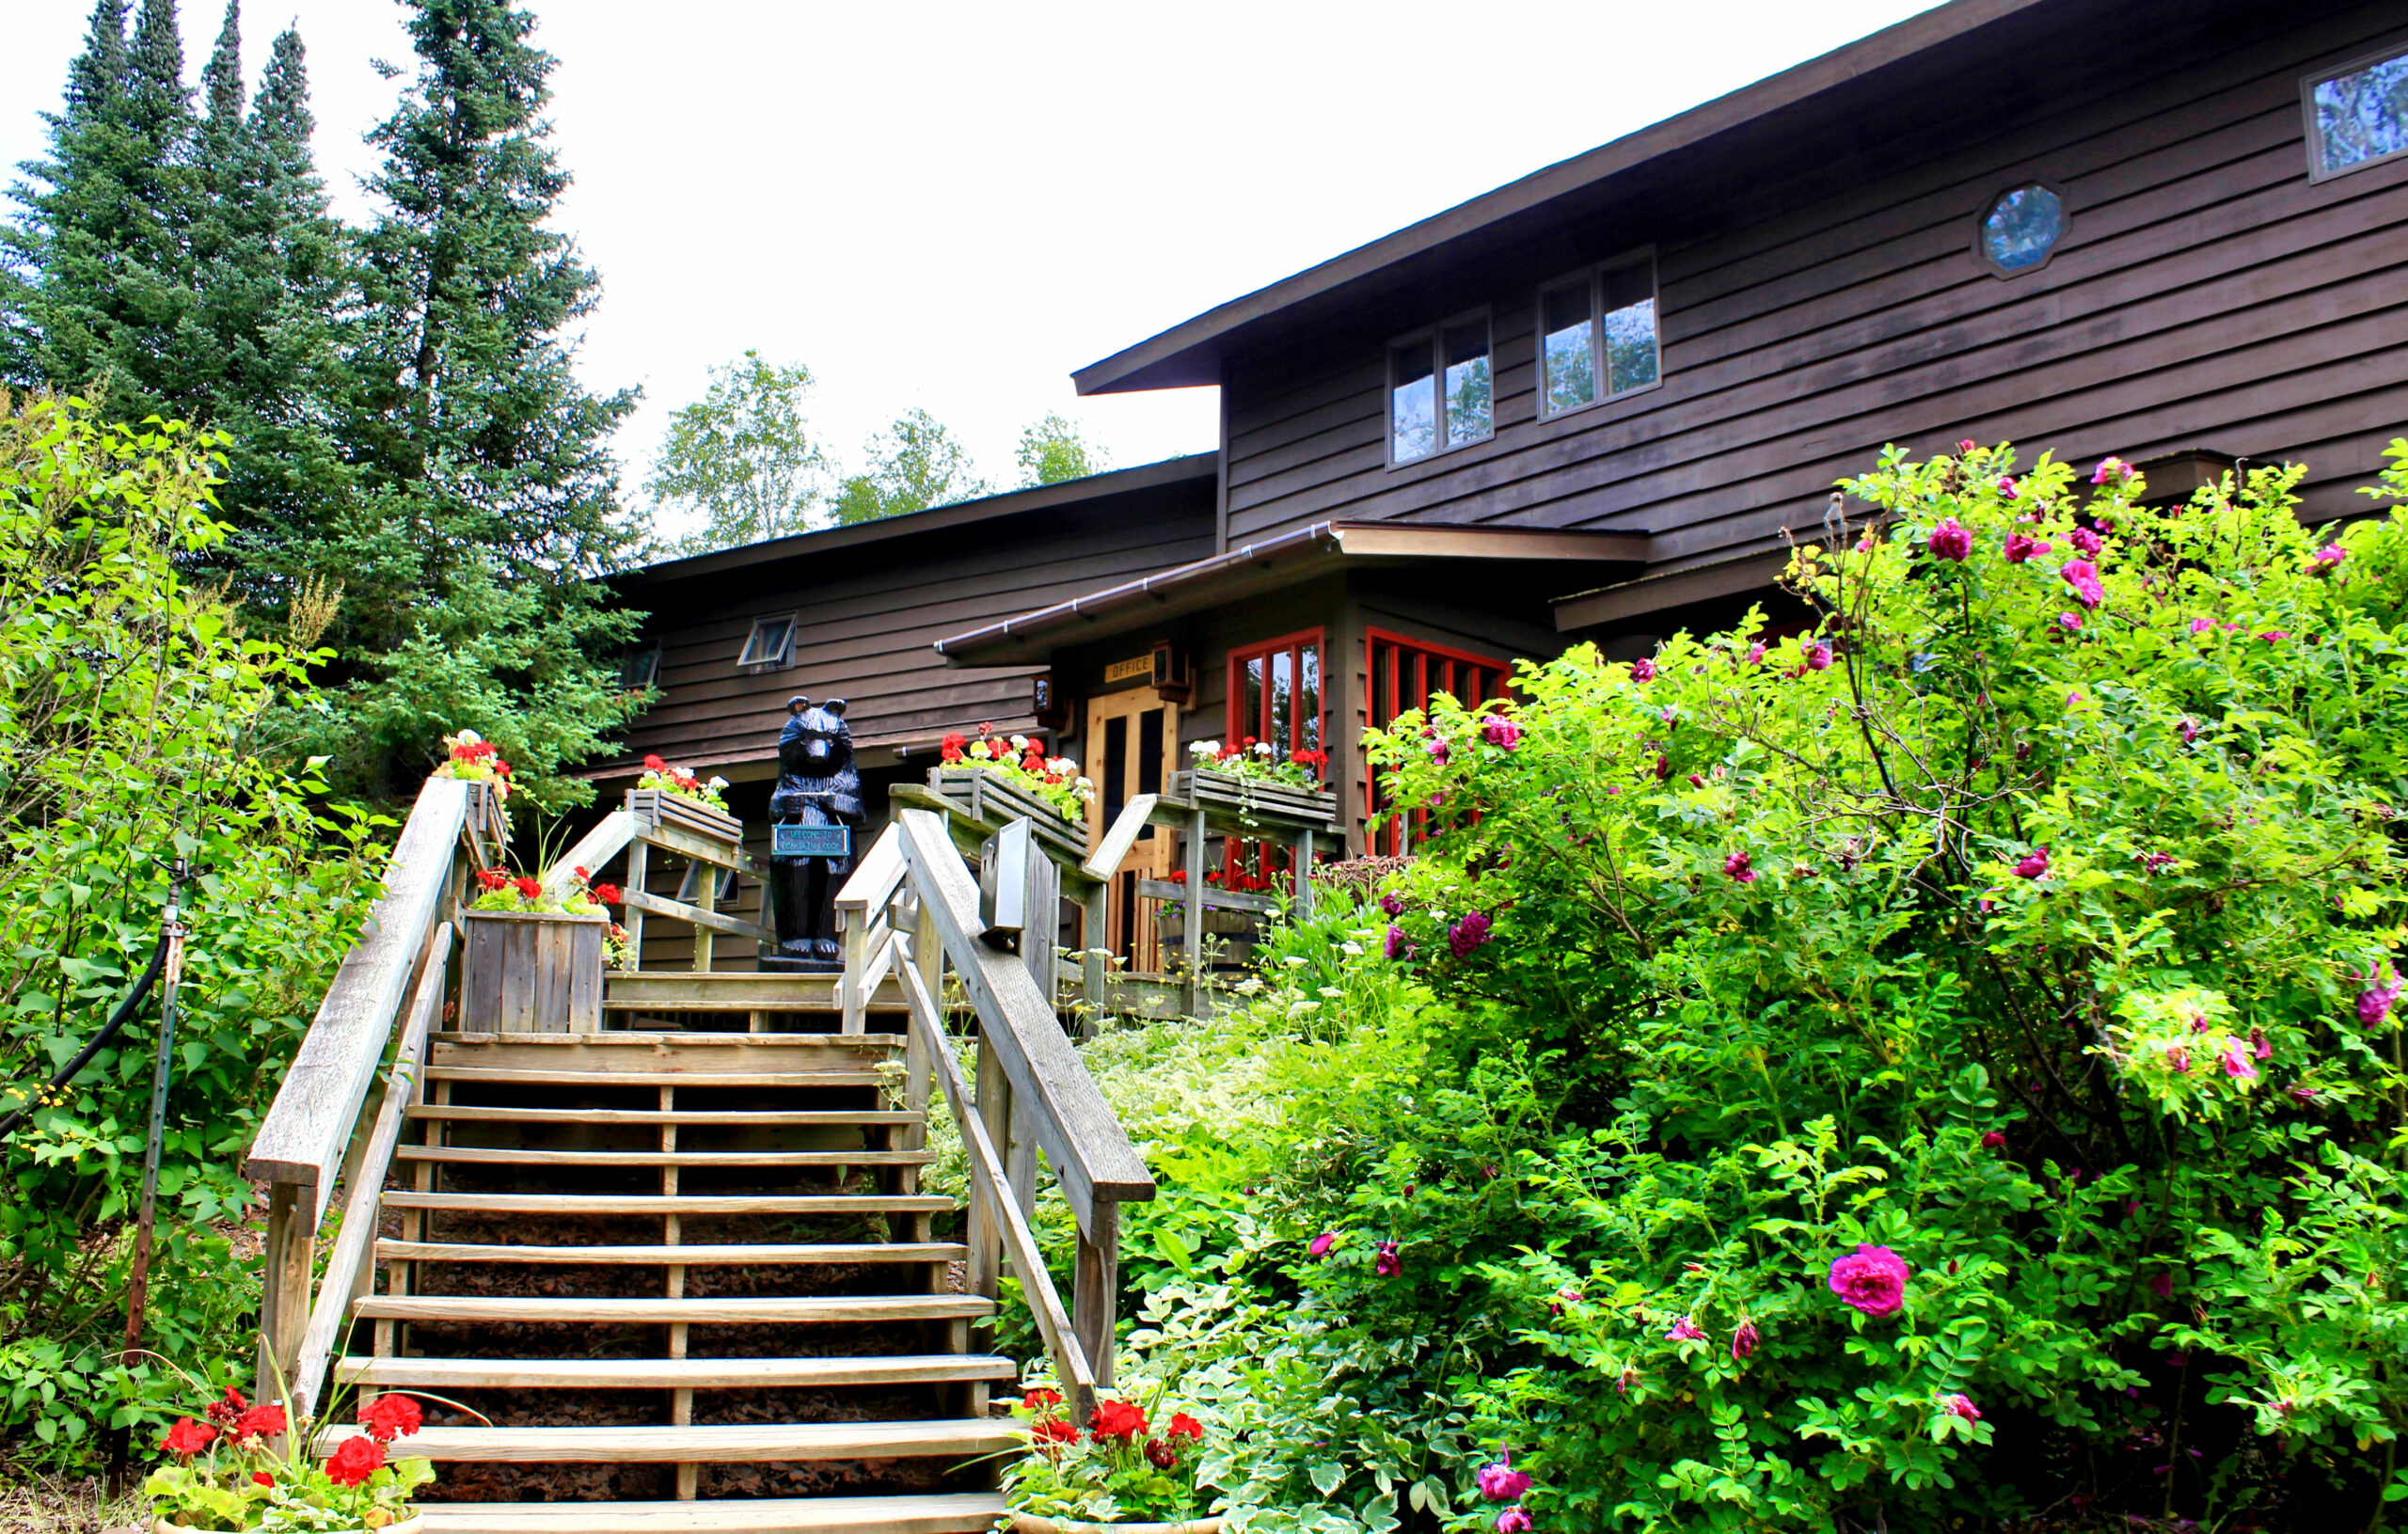 Stairs leading up to lodge with flower bushes in front